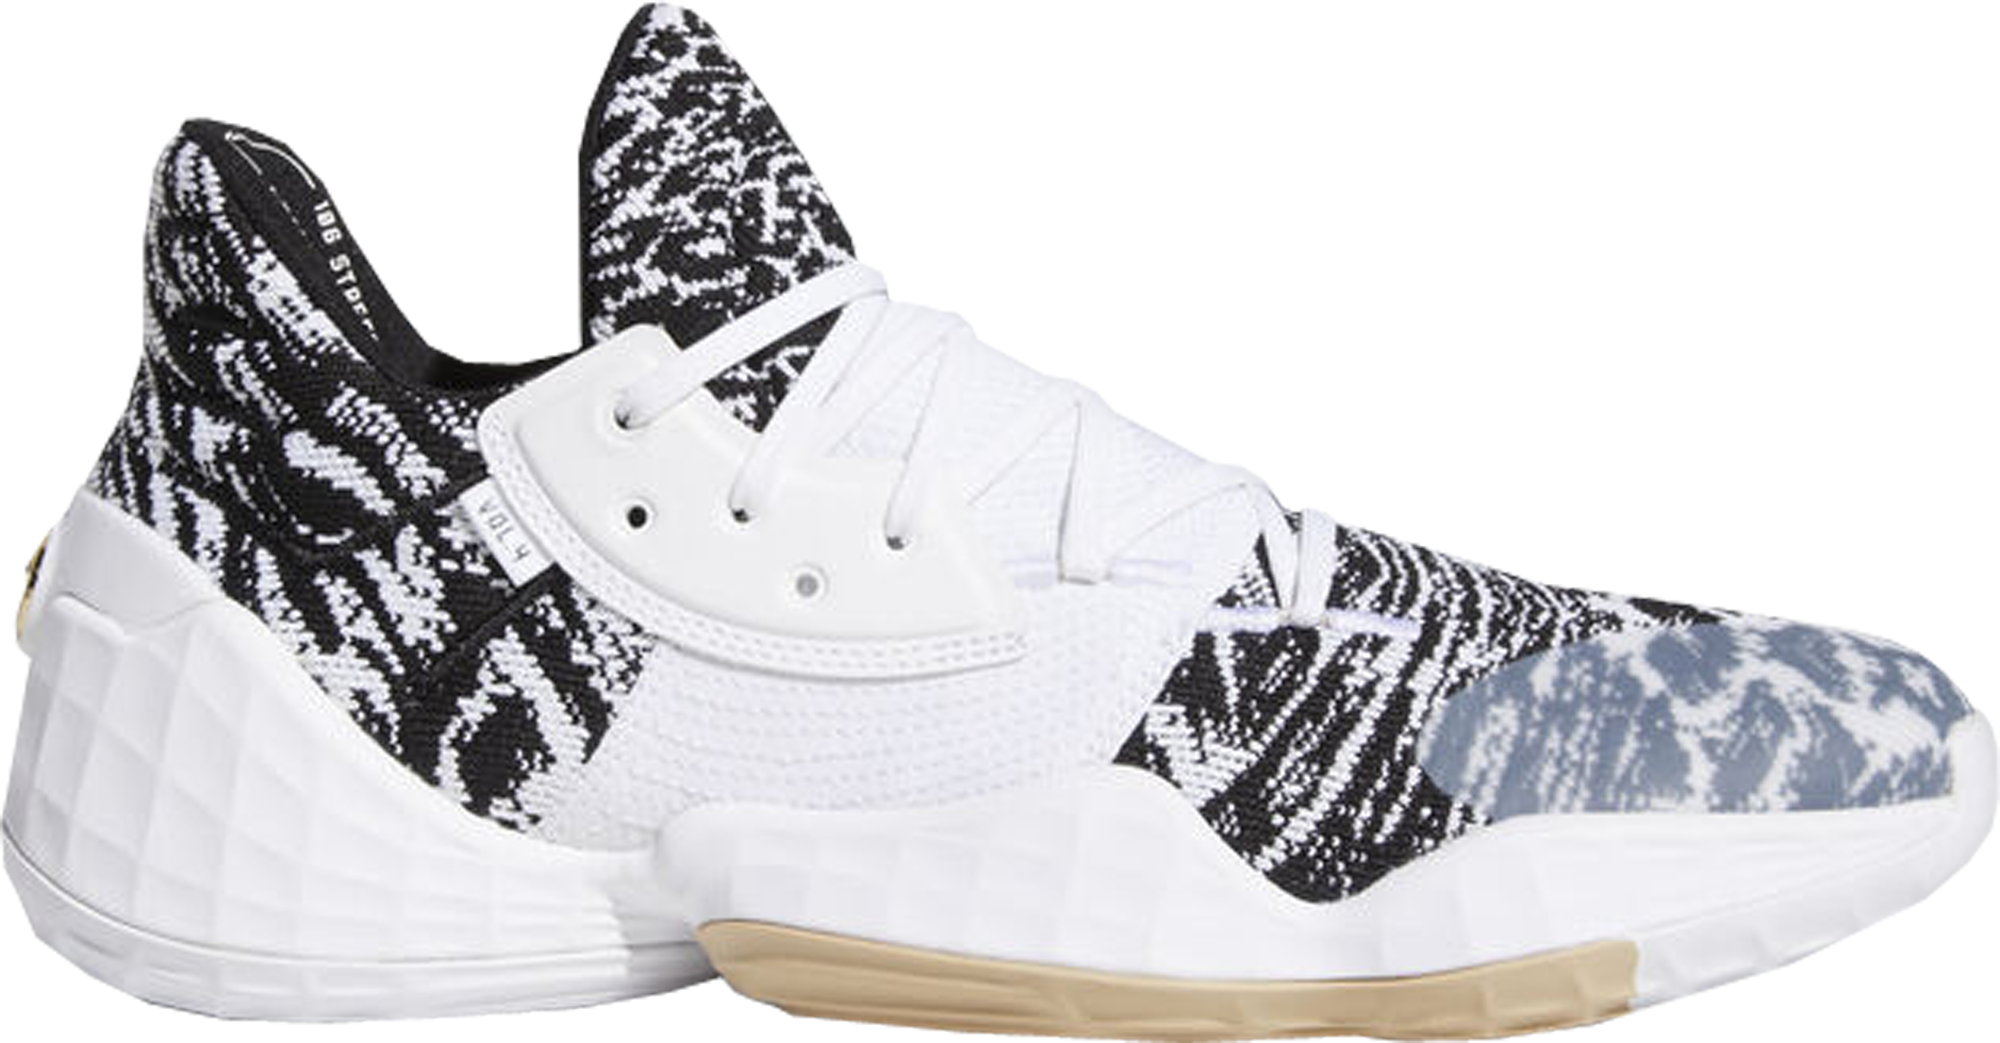 adidas harden vol 4 black and white